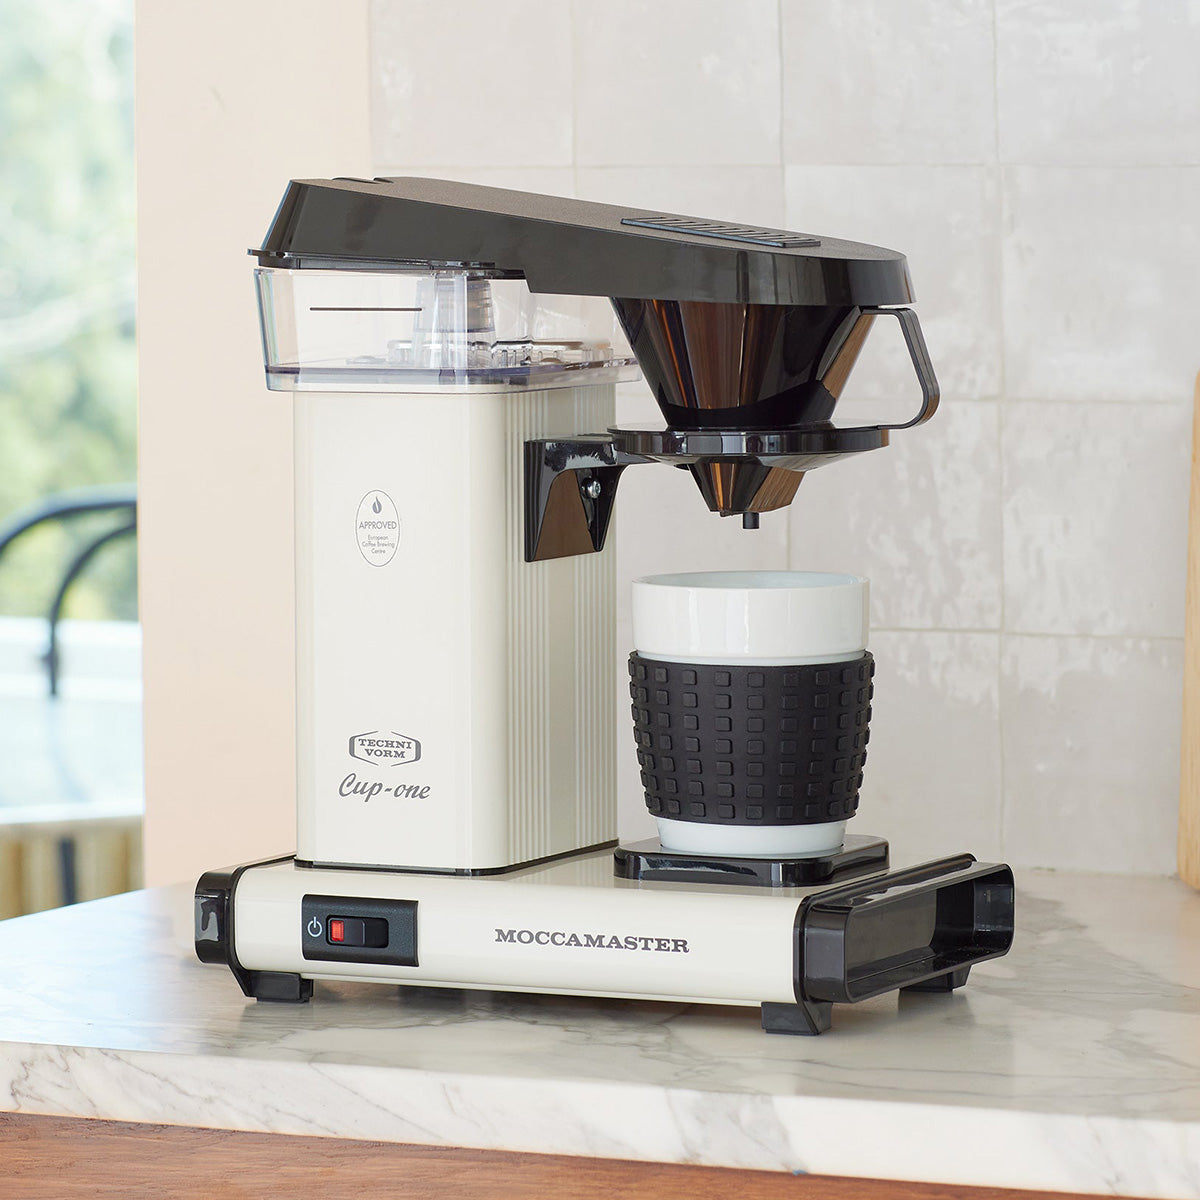 Technivorm Moccamaster Cup-One Coffee Maker #69211, Off-White – ECS Coffee